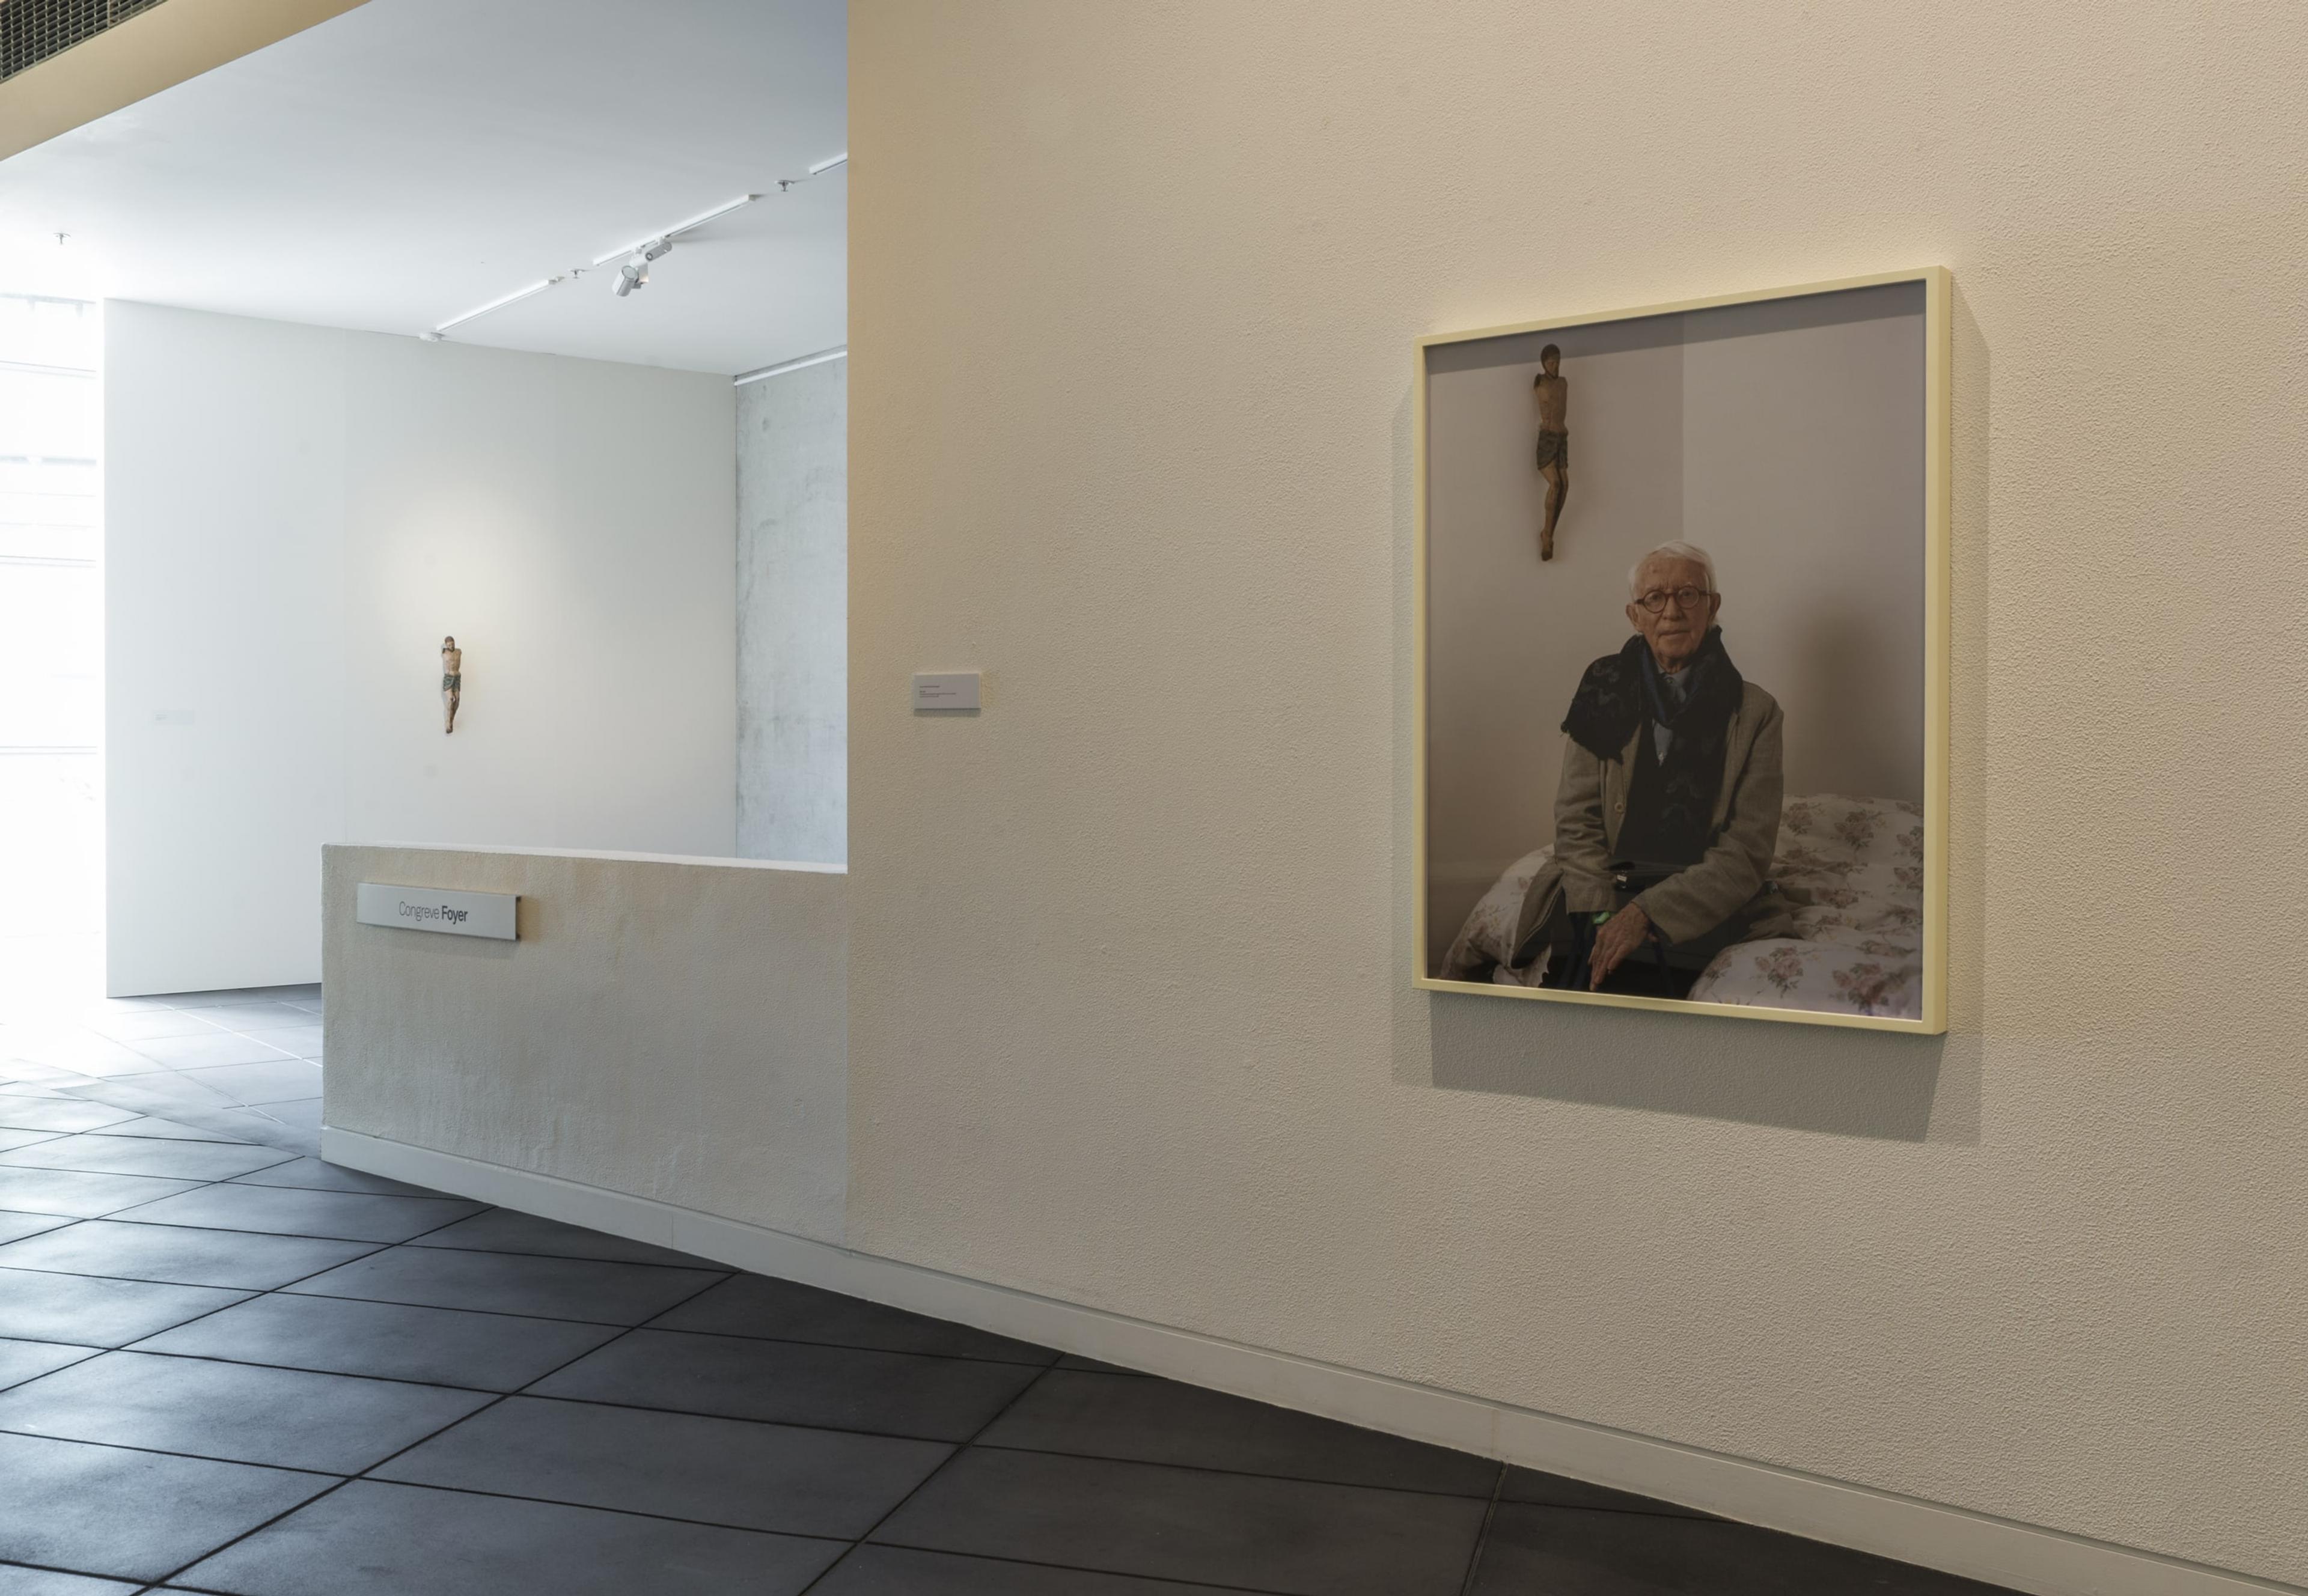 Installation view of Still looking: Peter McLeavey and the last photograph, 6 October – 20 December 2018, Adam Art Gallery Te Pātaka Toi. Foreground: Yvonne Todd, Peter, 2014, chromogenic photograph, commissioned from the artist in 2014, Collection of Peter McLeavey.